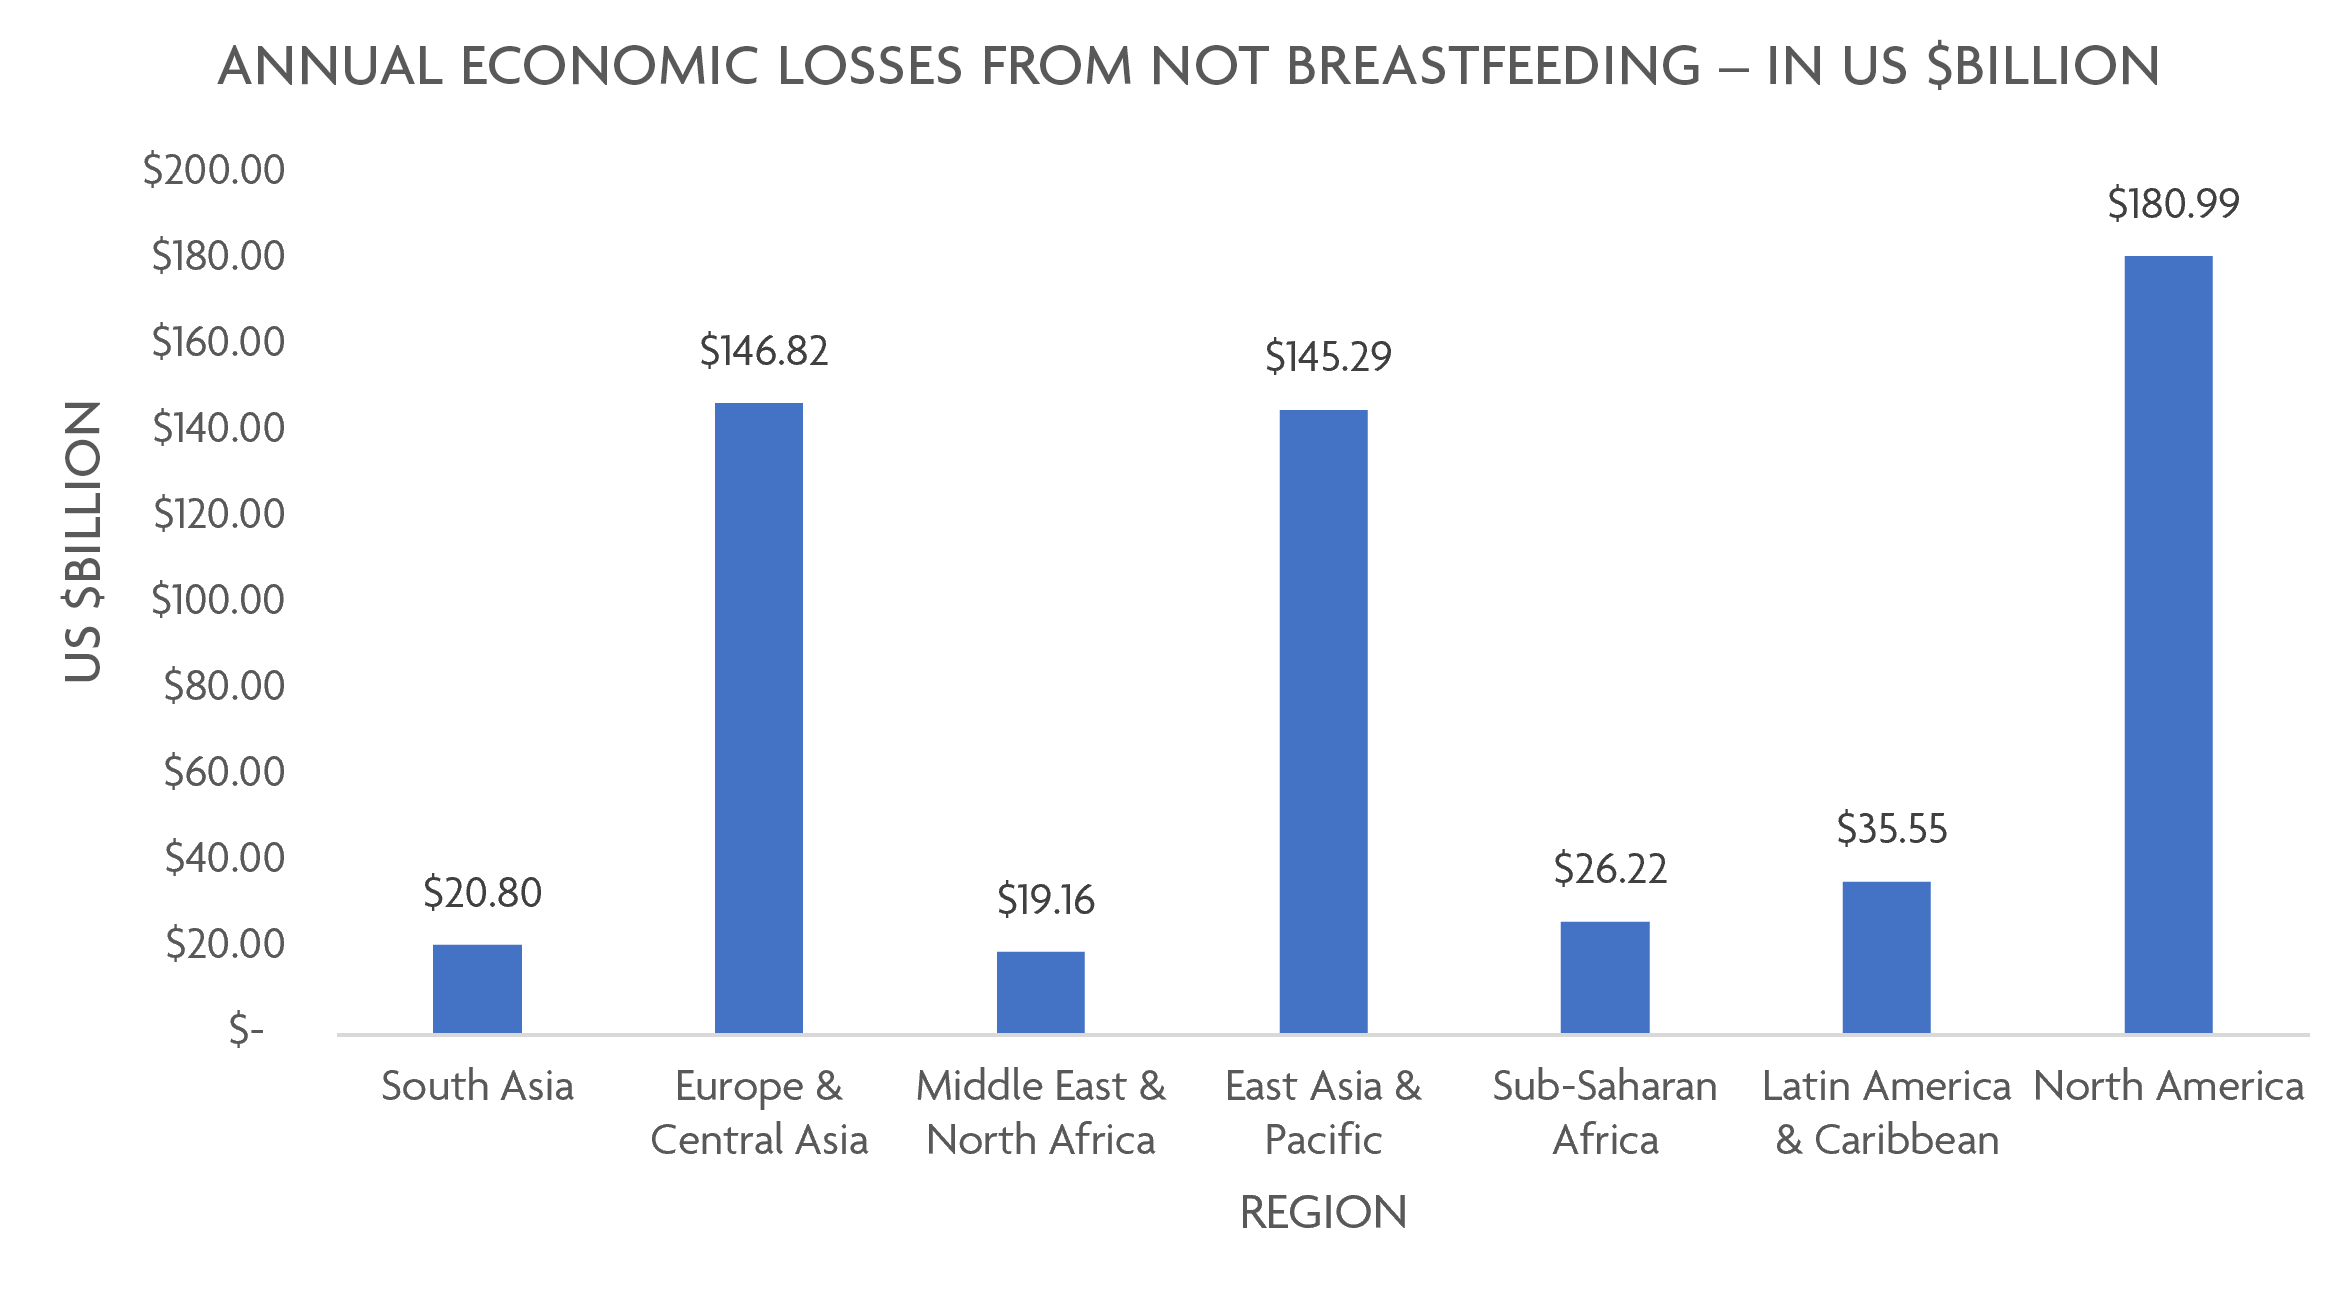 graph showing the annual economic losses of not breastfeeding by region